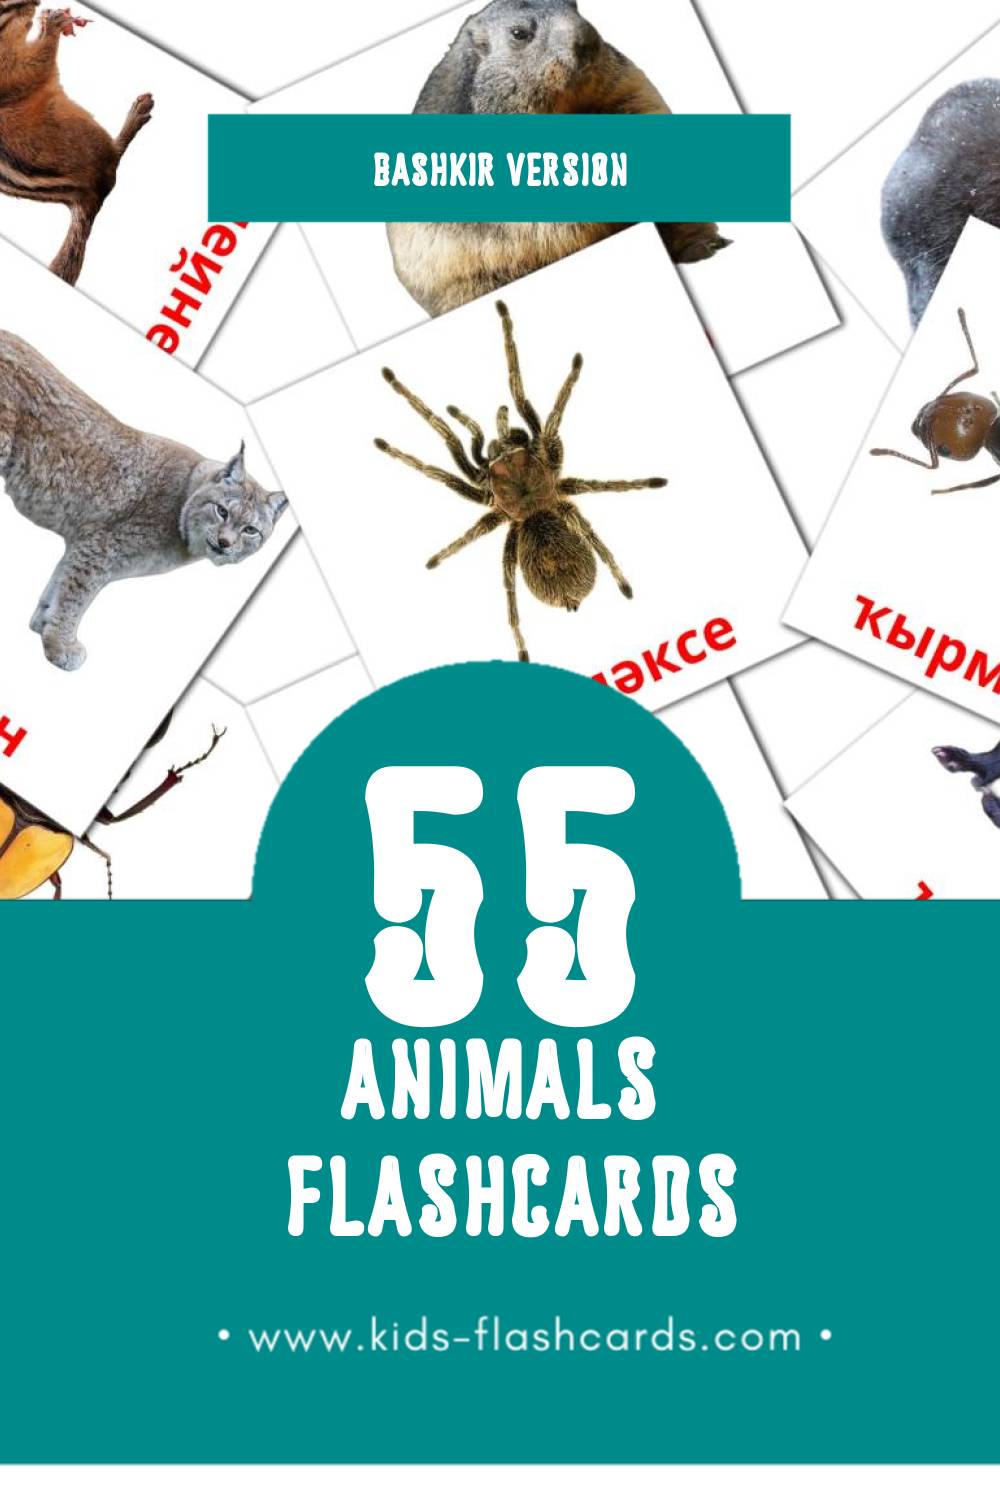 Visual Животни Flashcards for Toddlers (91 cards in Bashkir)